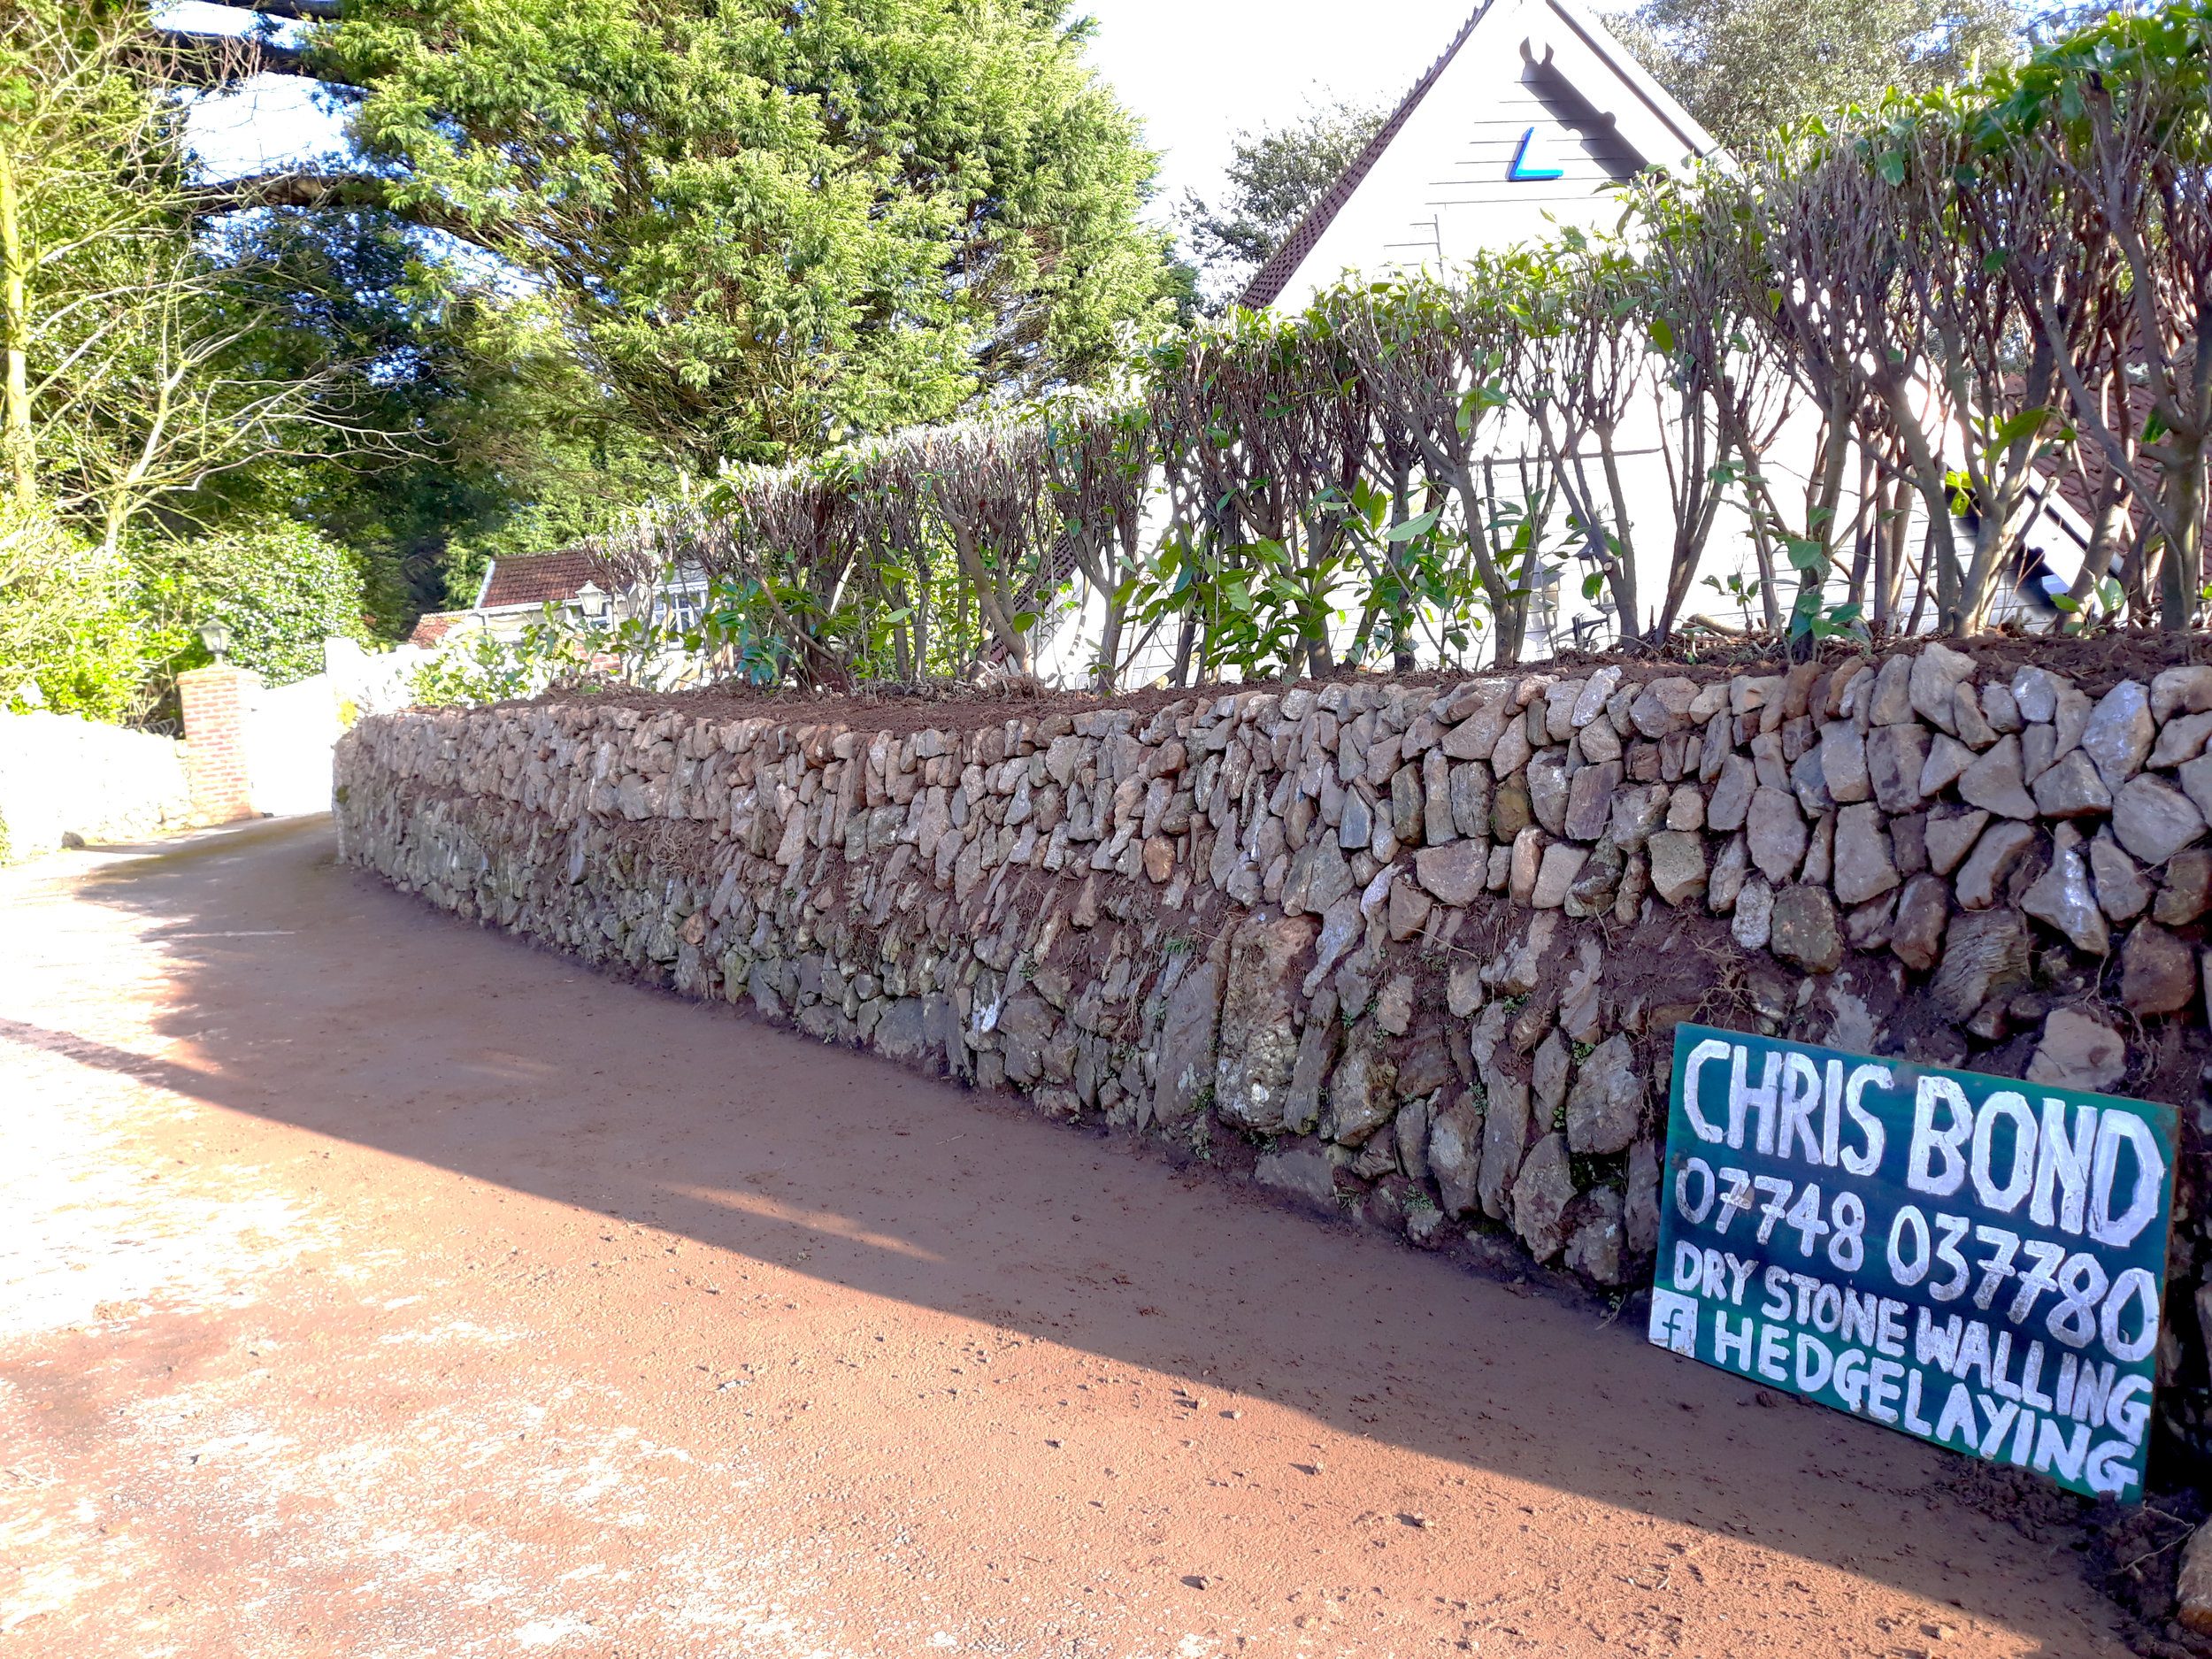 dry stone walling hedge laying South Devon Cornwall Plymouth services UK south west England Chris Bond